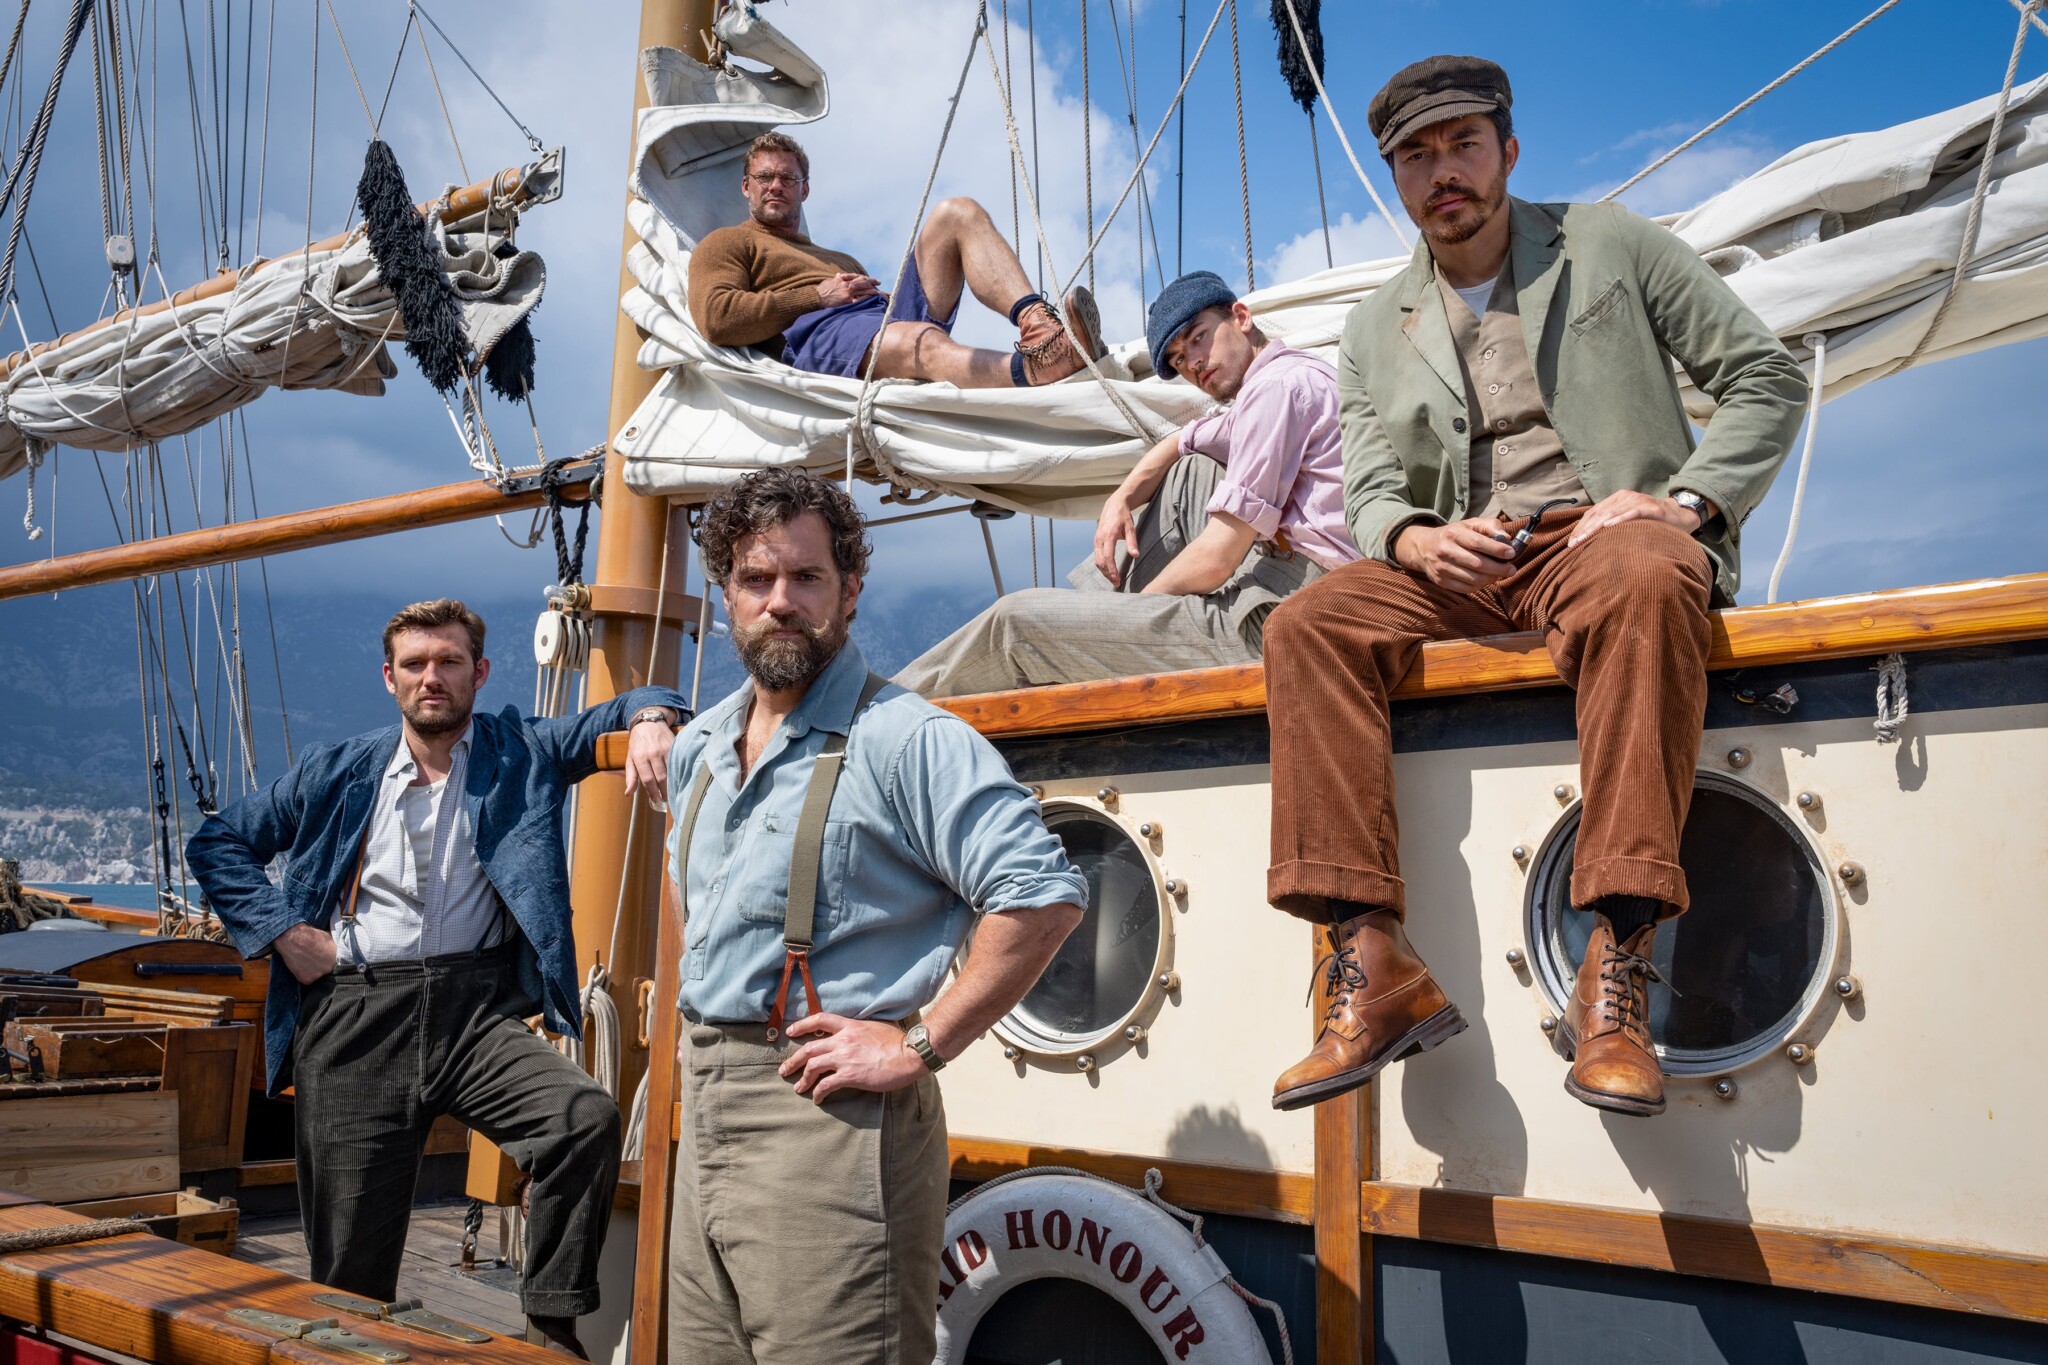 The cast of "The Ministry of Ungentlemanly Warfare" on a boat set.